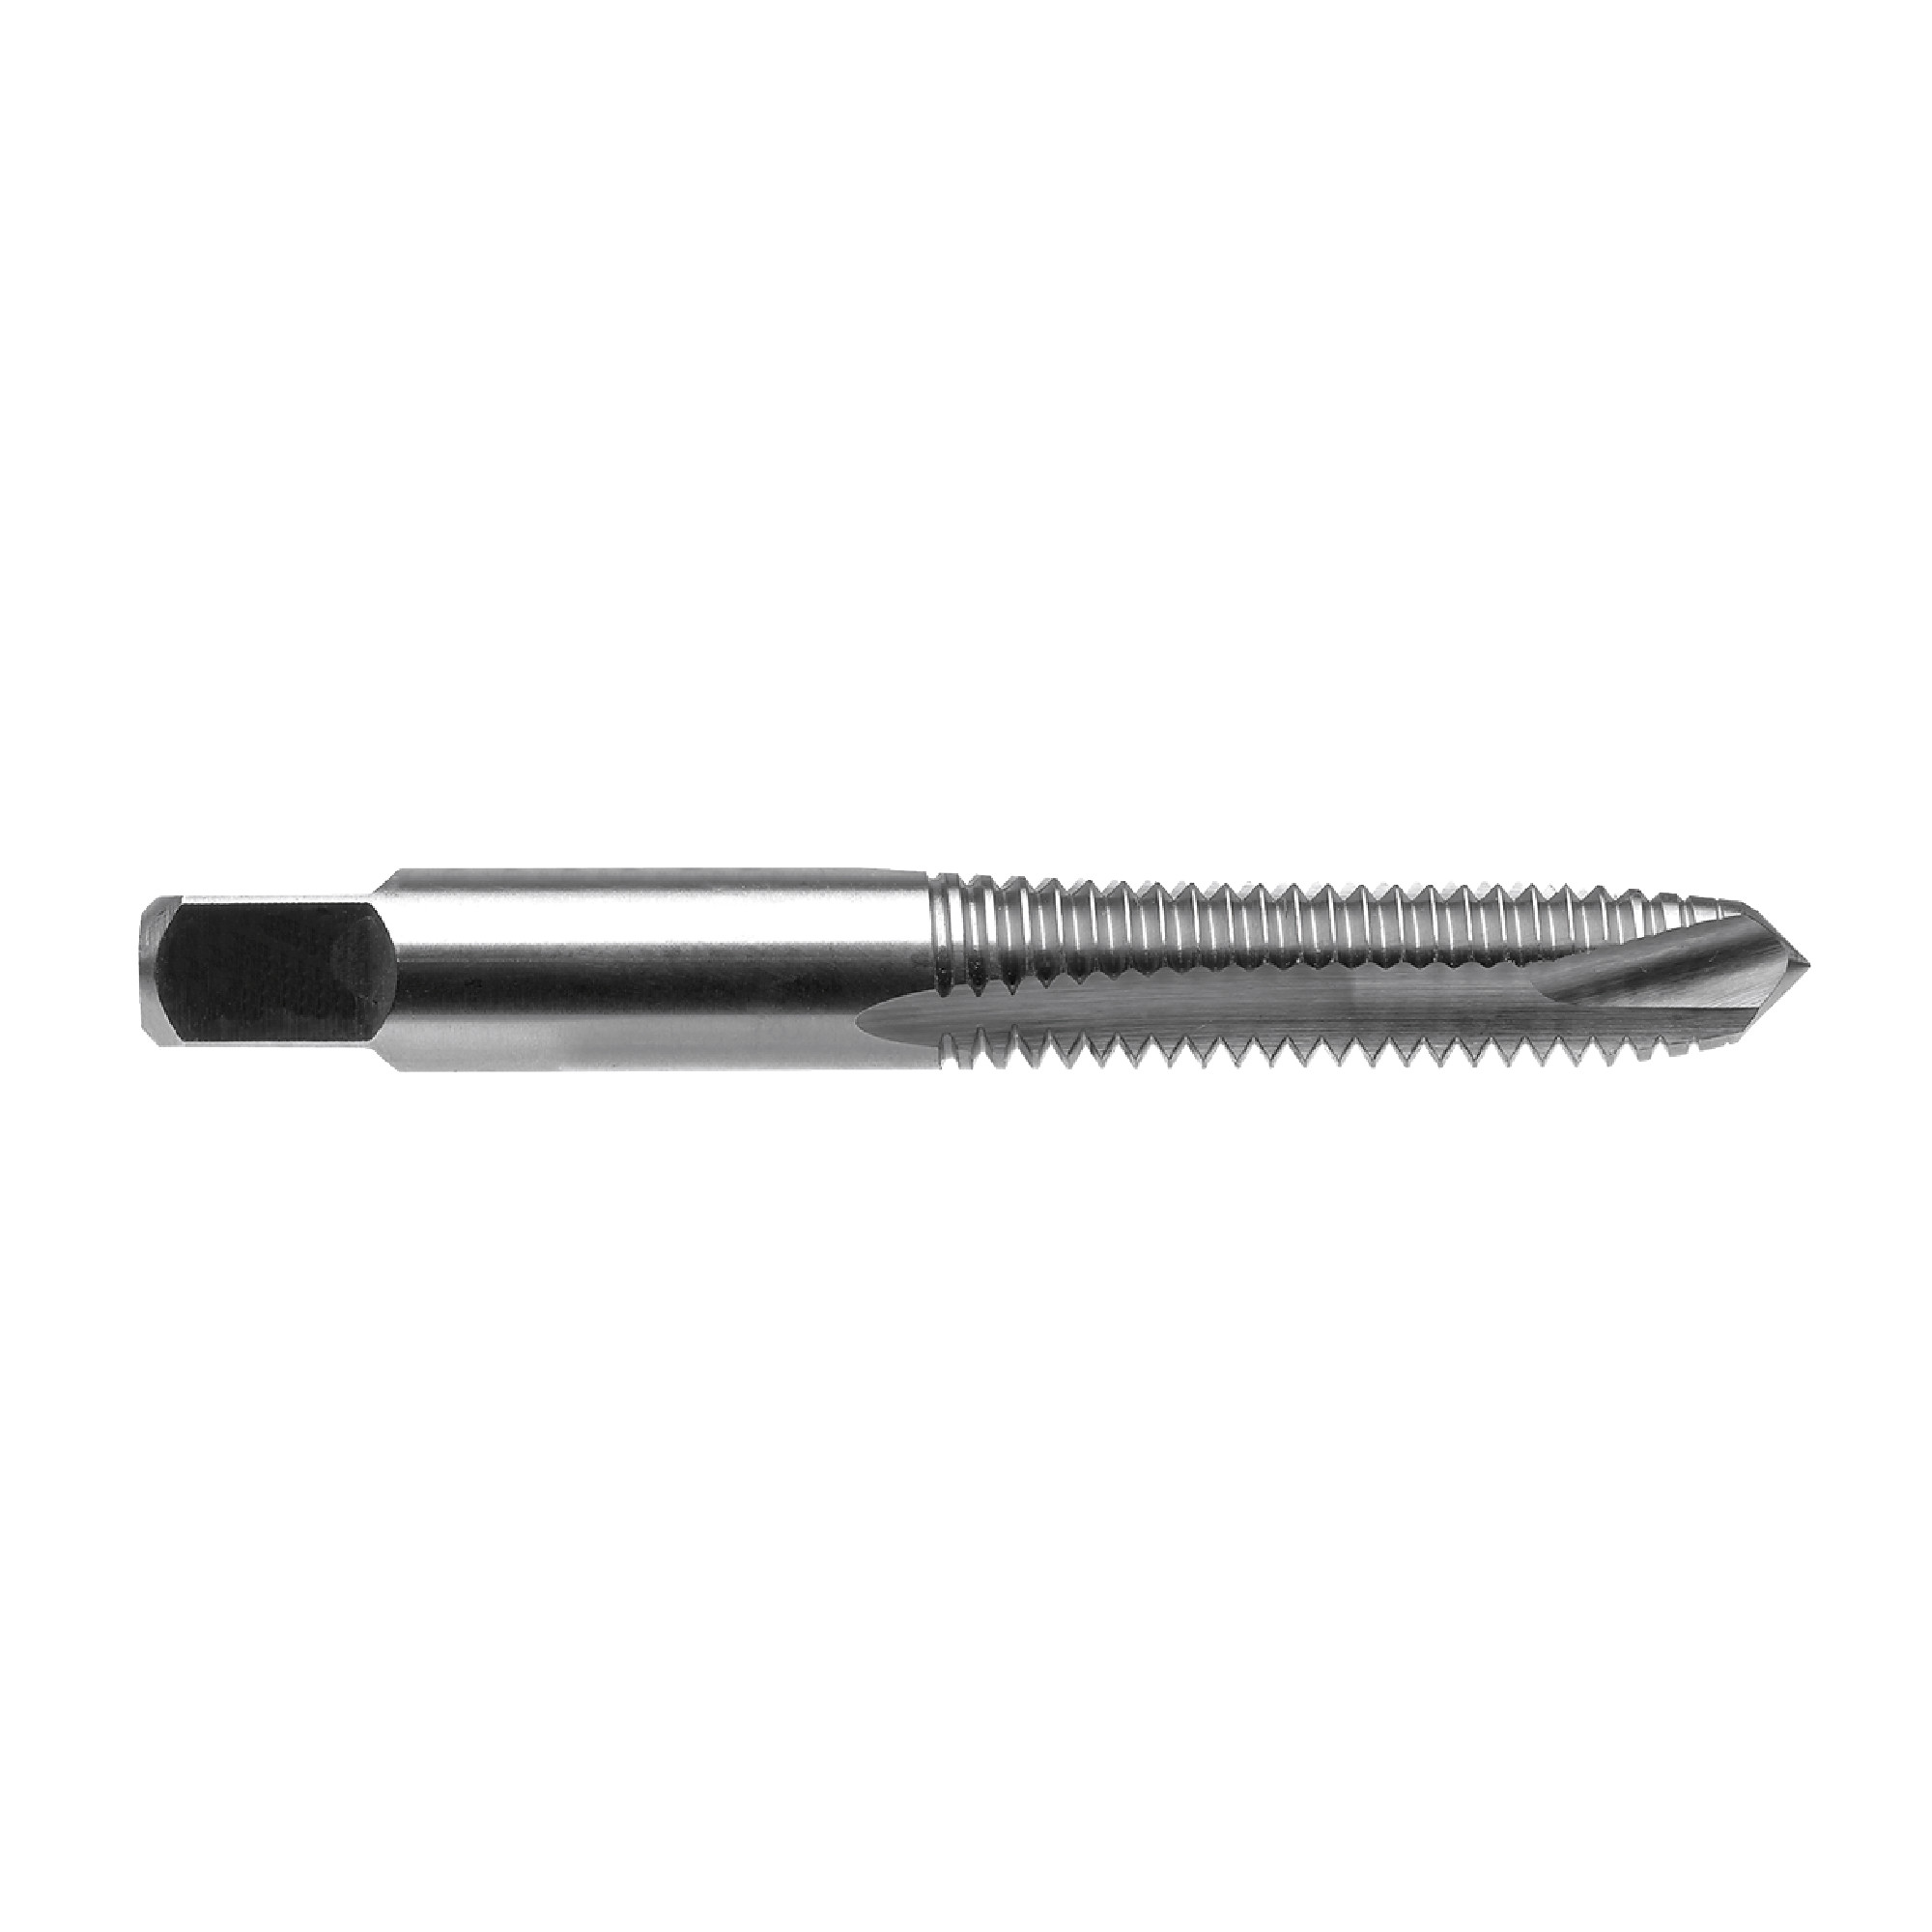 10x32 H3 2F Plug Spiral Pointed Tin Coated Tap